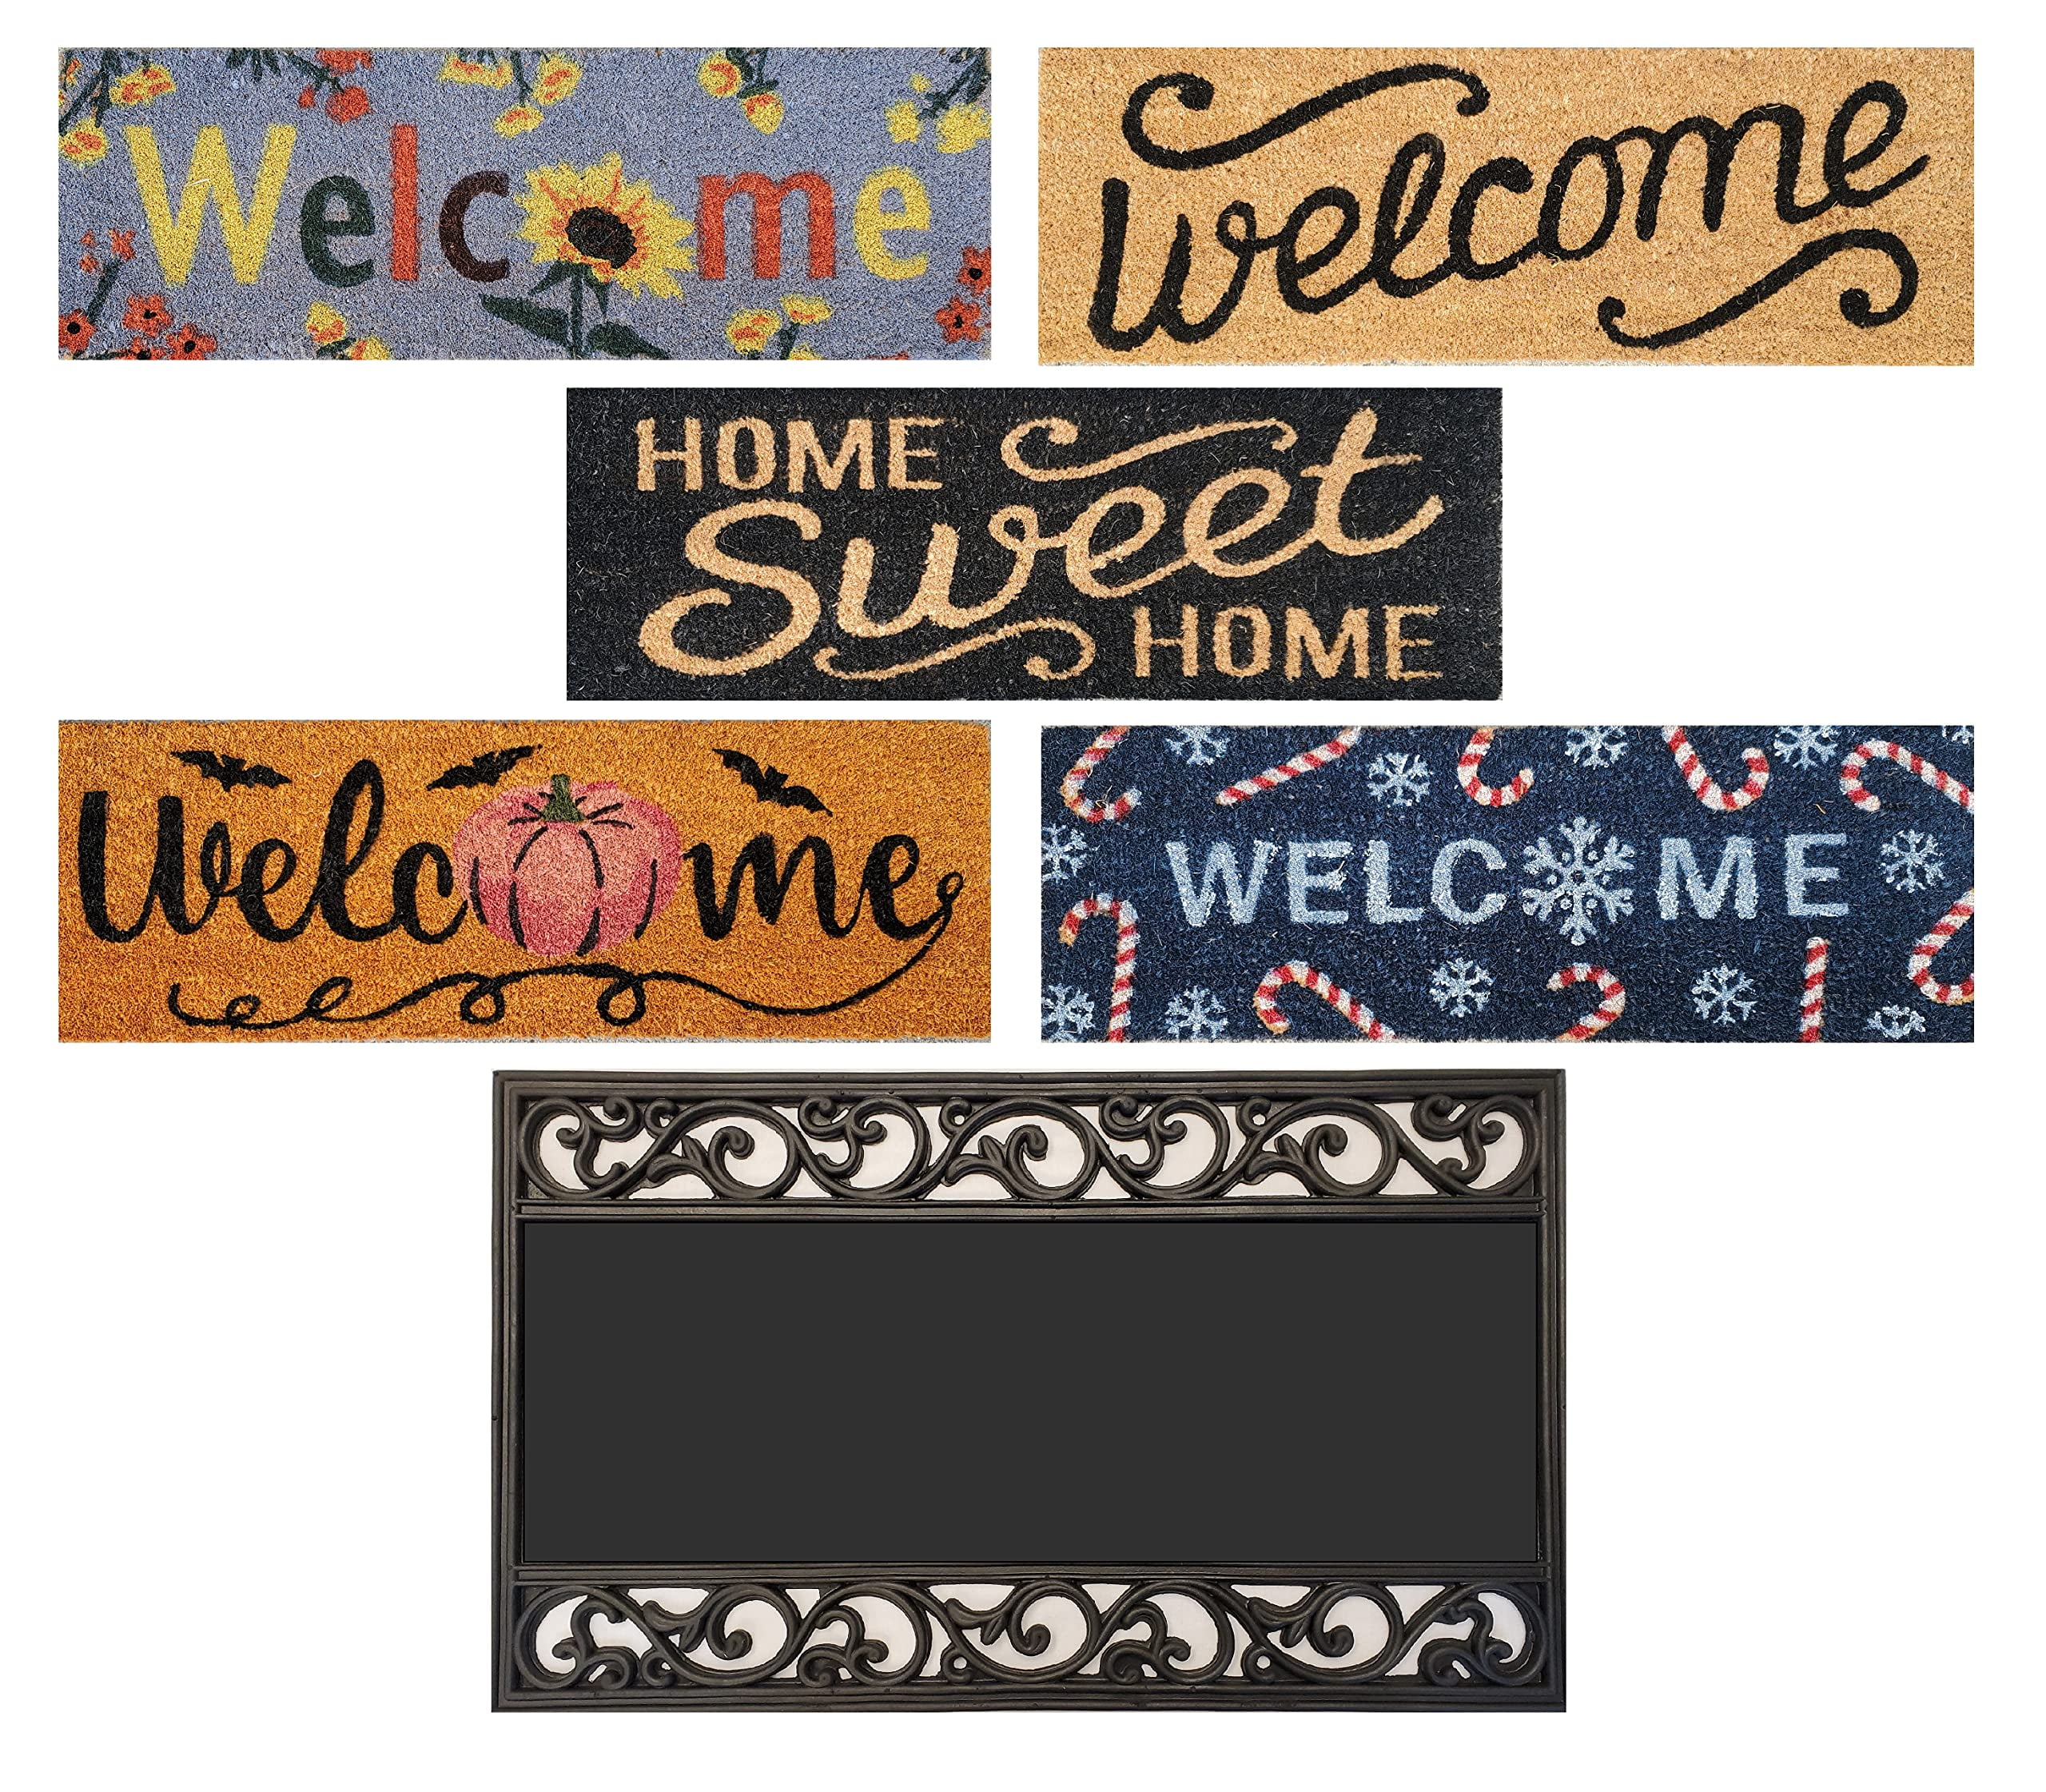 Welcome Mats 101: How To Choose One